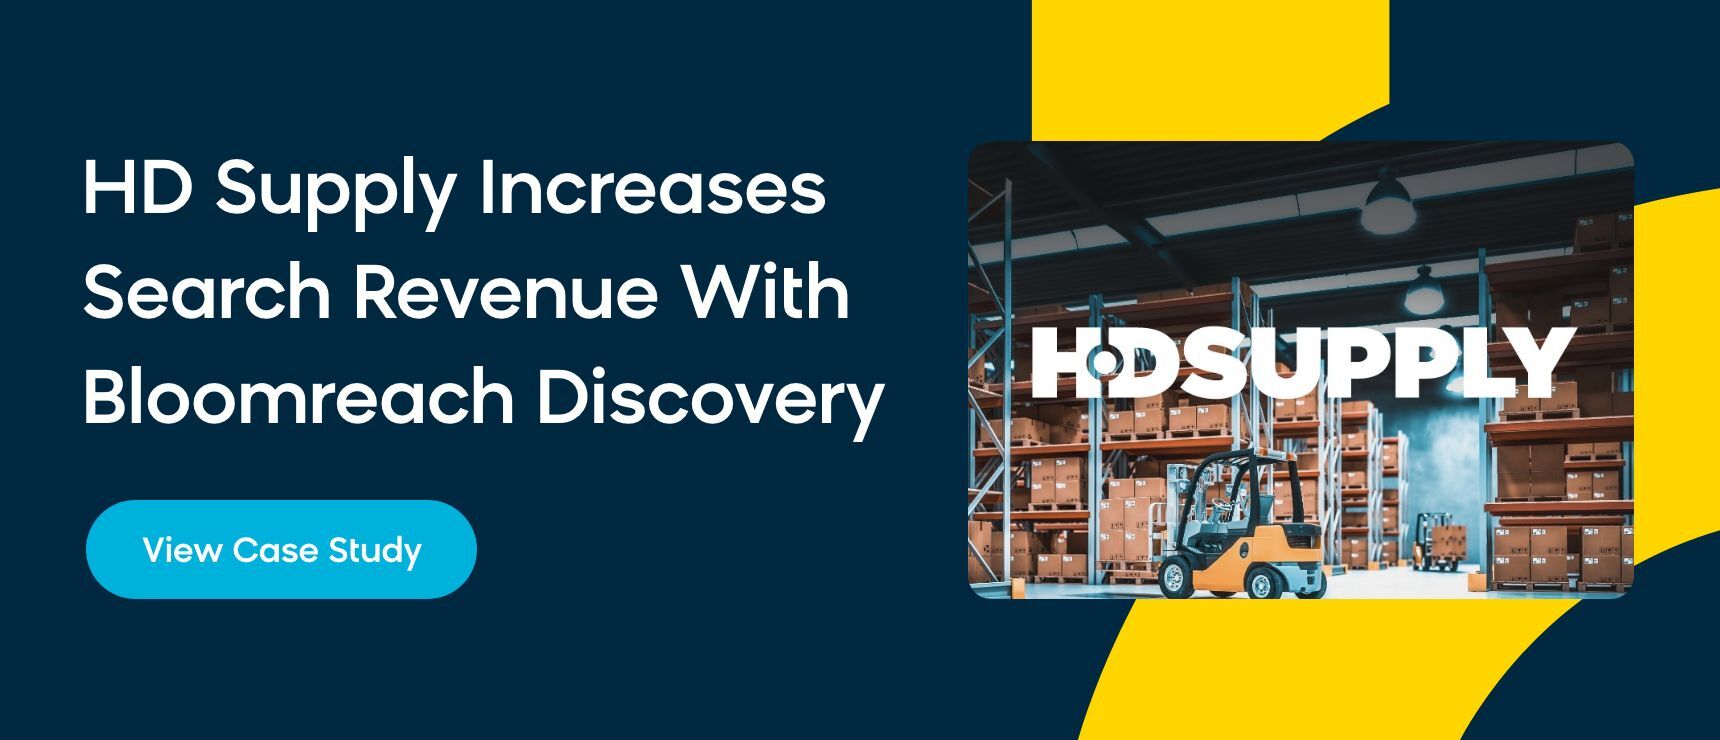 HD Supply case study with Bloomreach